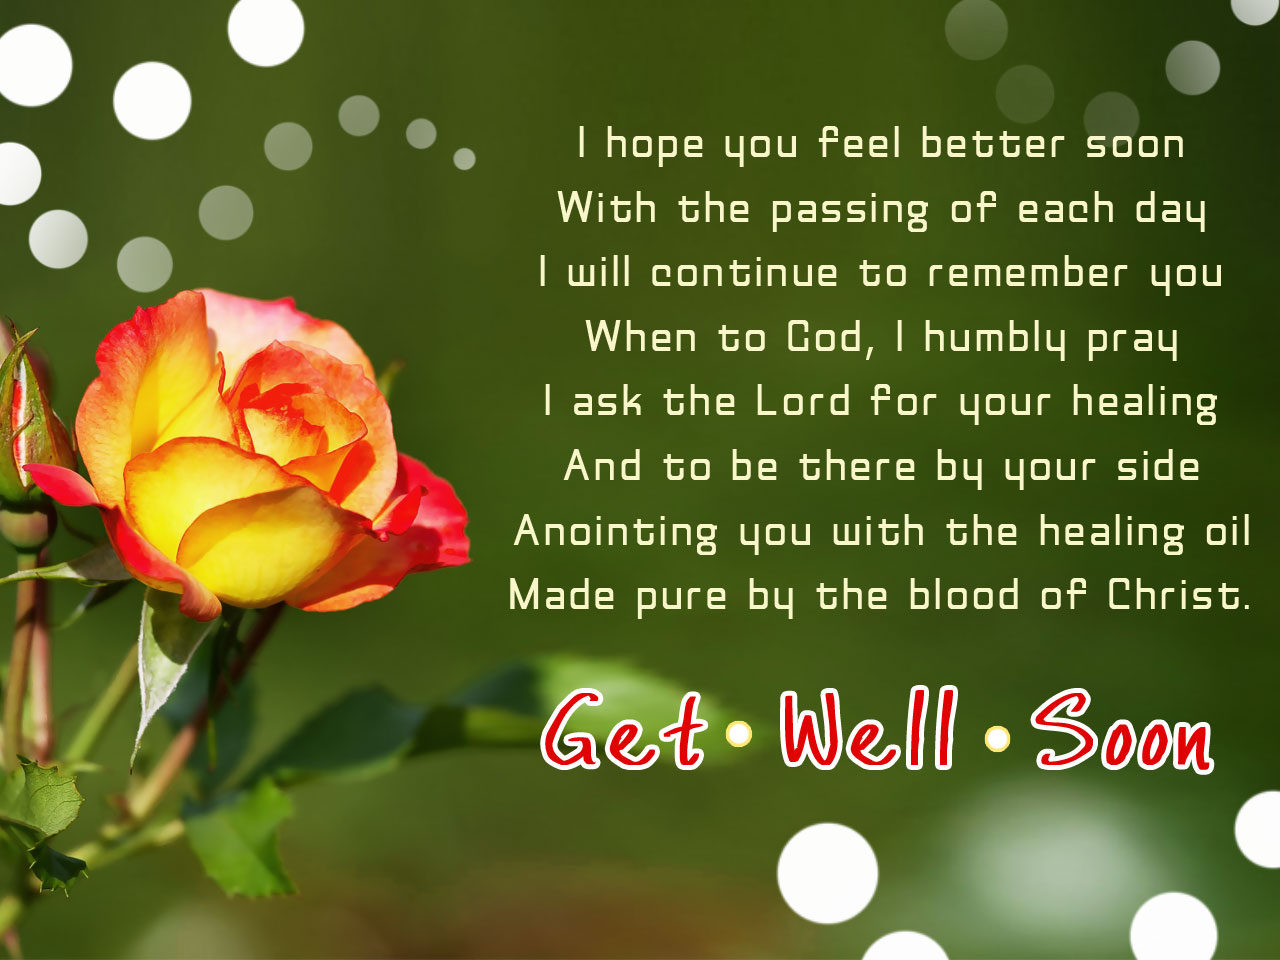 Get Well Soon Wishes For Christians Pictures, Images.